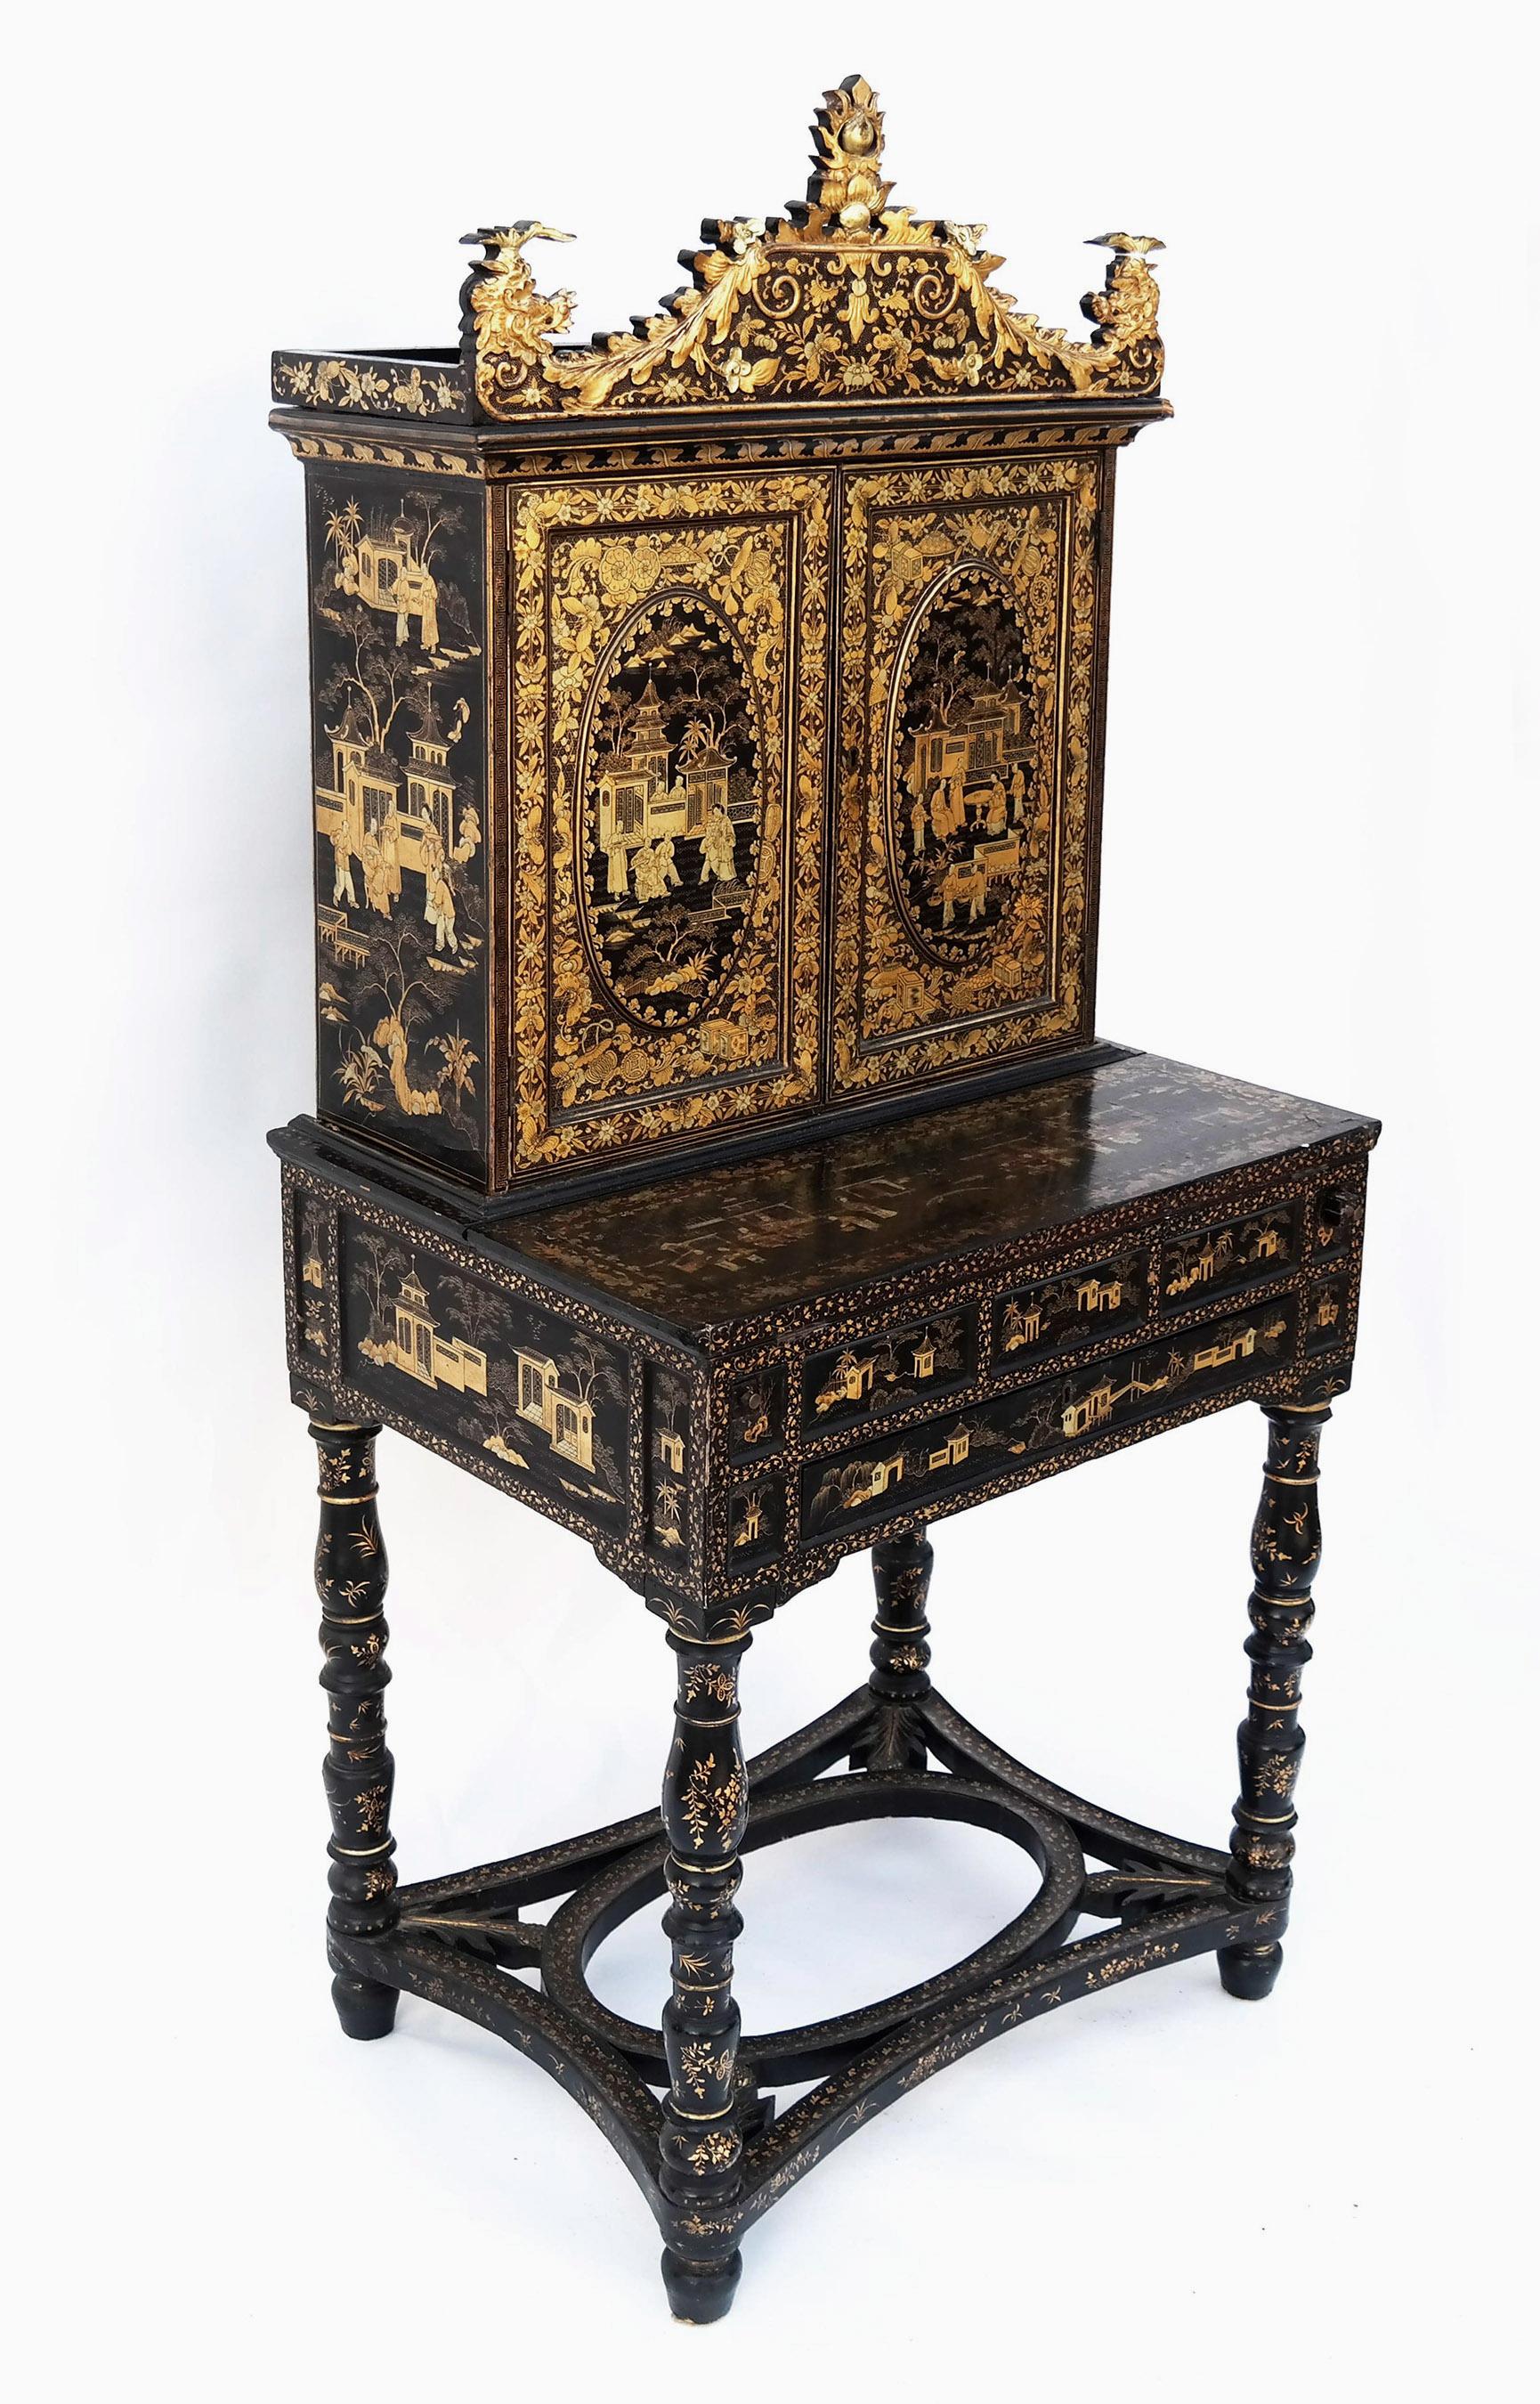 An exceptional black lacquer and silver and gold gilt decorated bonheur du jour from the early 19th century. The upper case is surmounted by a carved pediment with dragon finials and foliate designs. Two doors with painted oval panels depict village